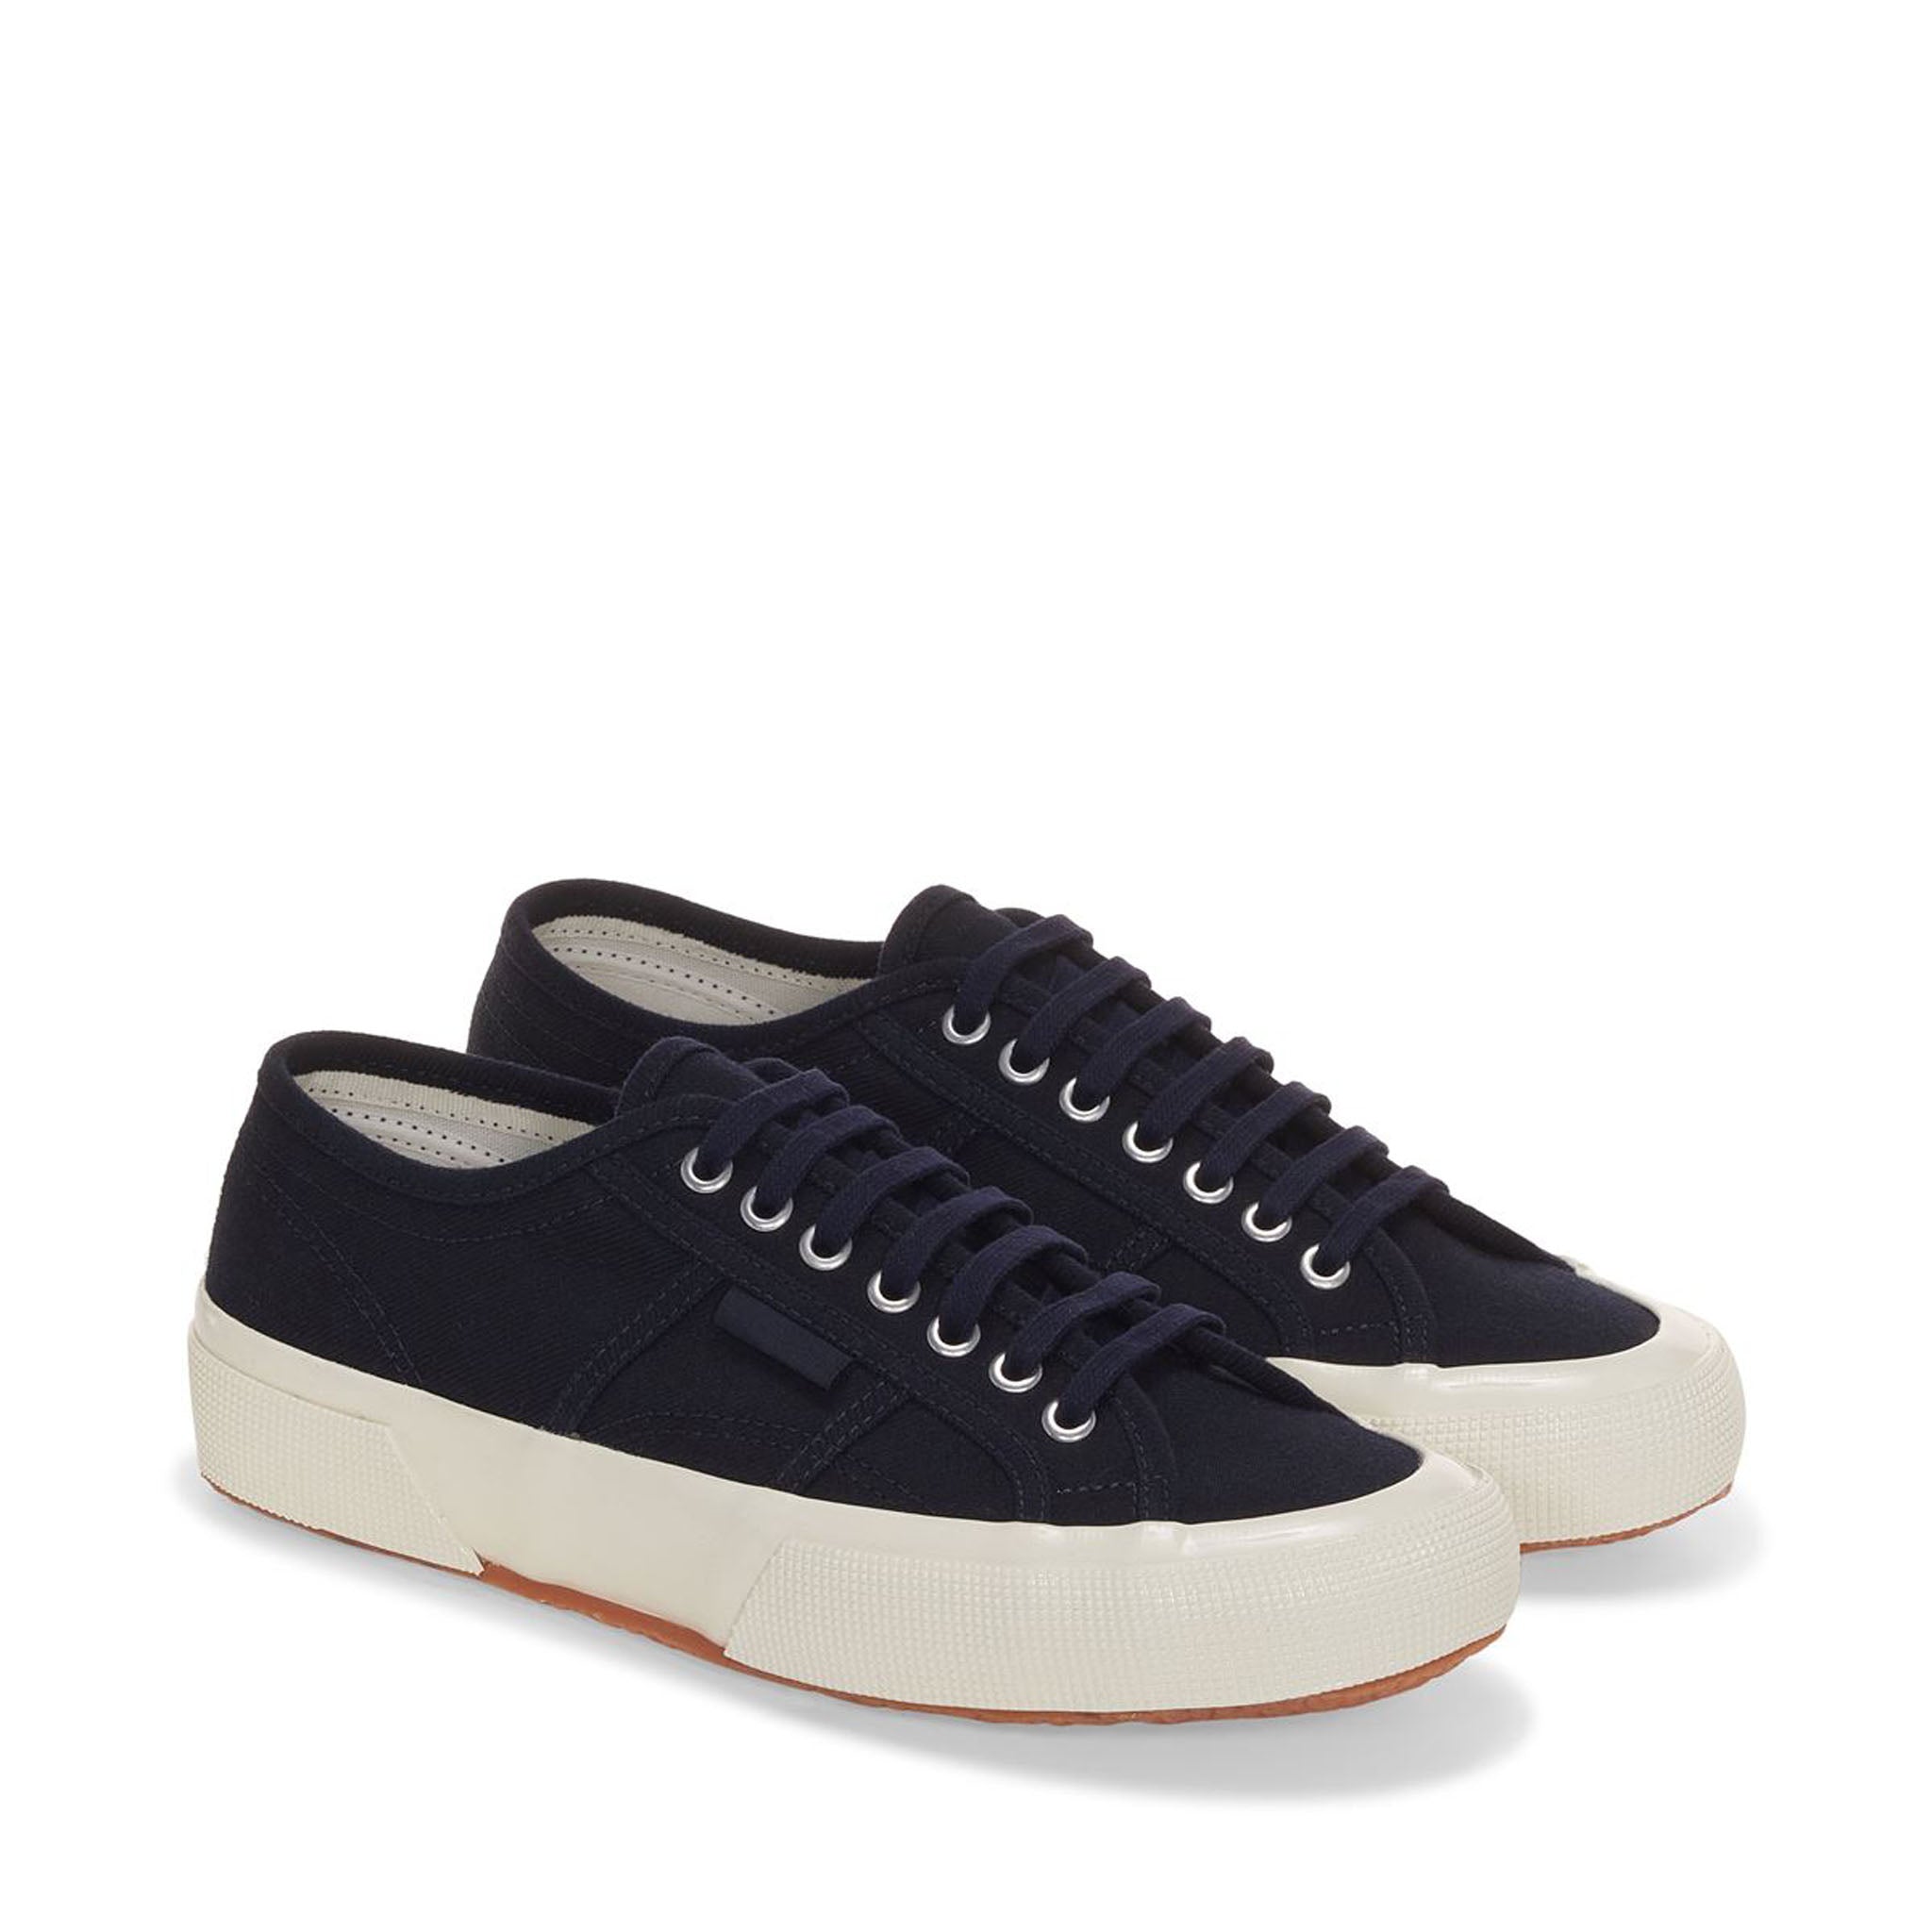 Superga 2750 Og Wool Deadstock Sneakers - Blue Navy. Front view.